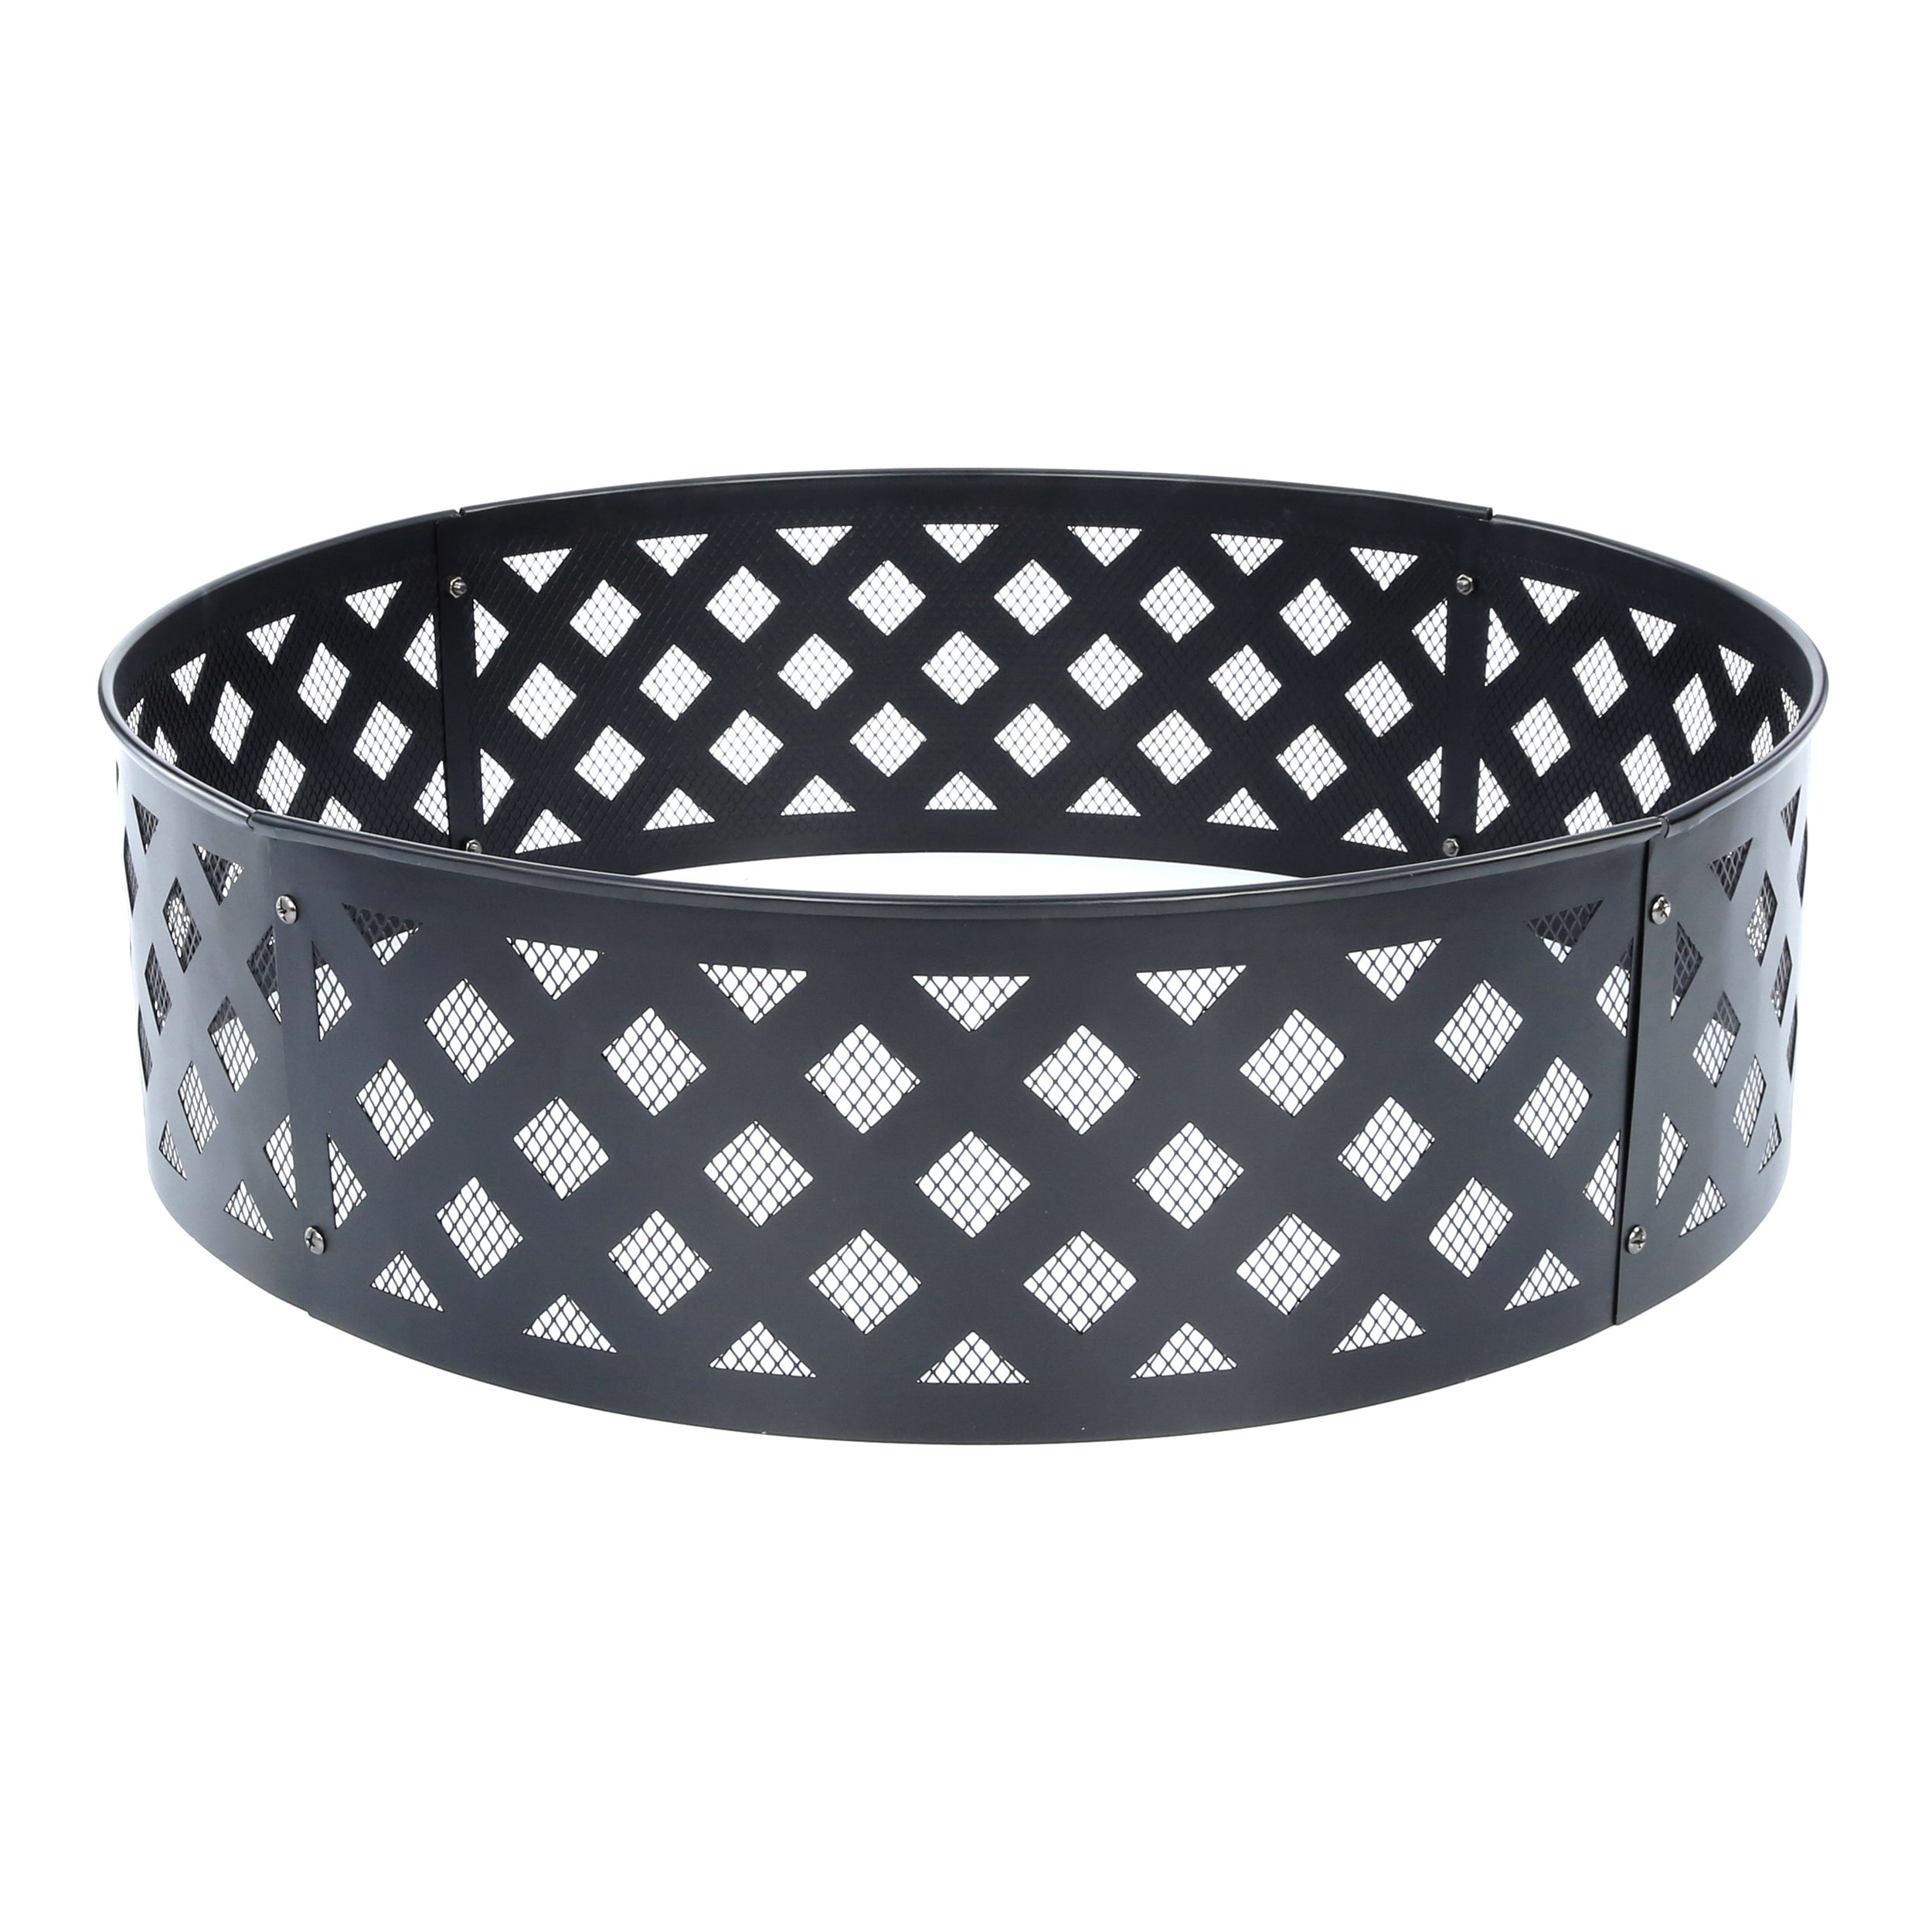 Lattice Fire Ring In The Rings, 72 Inch Fire Pit Ring